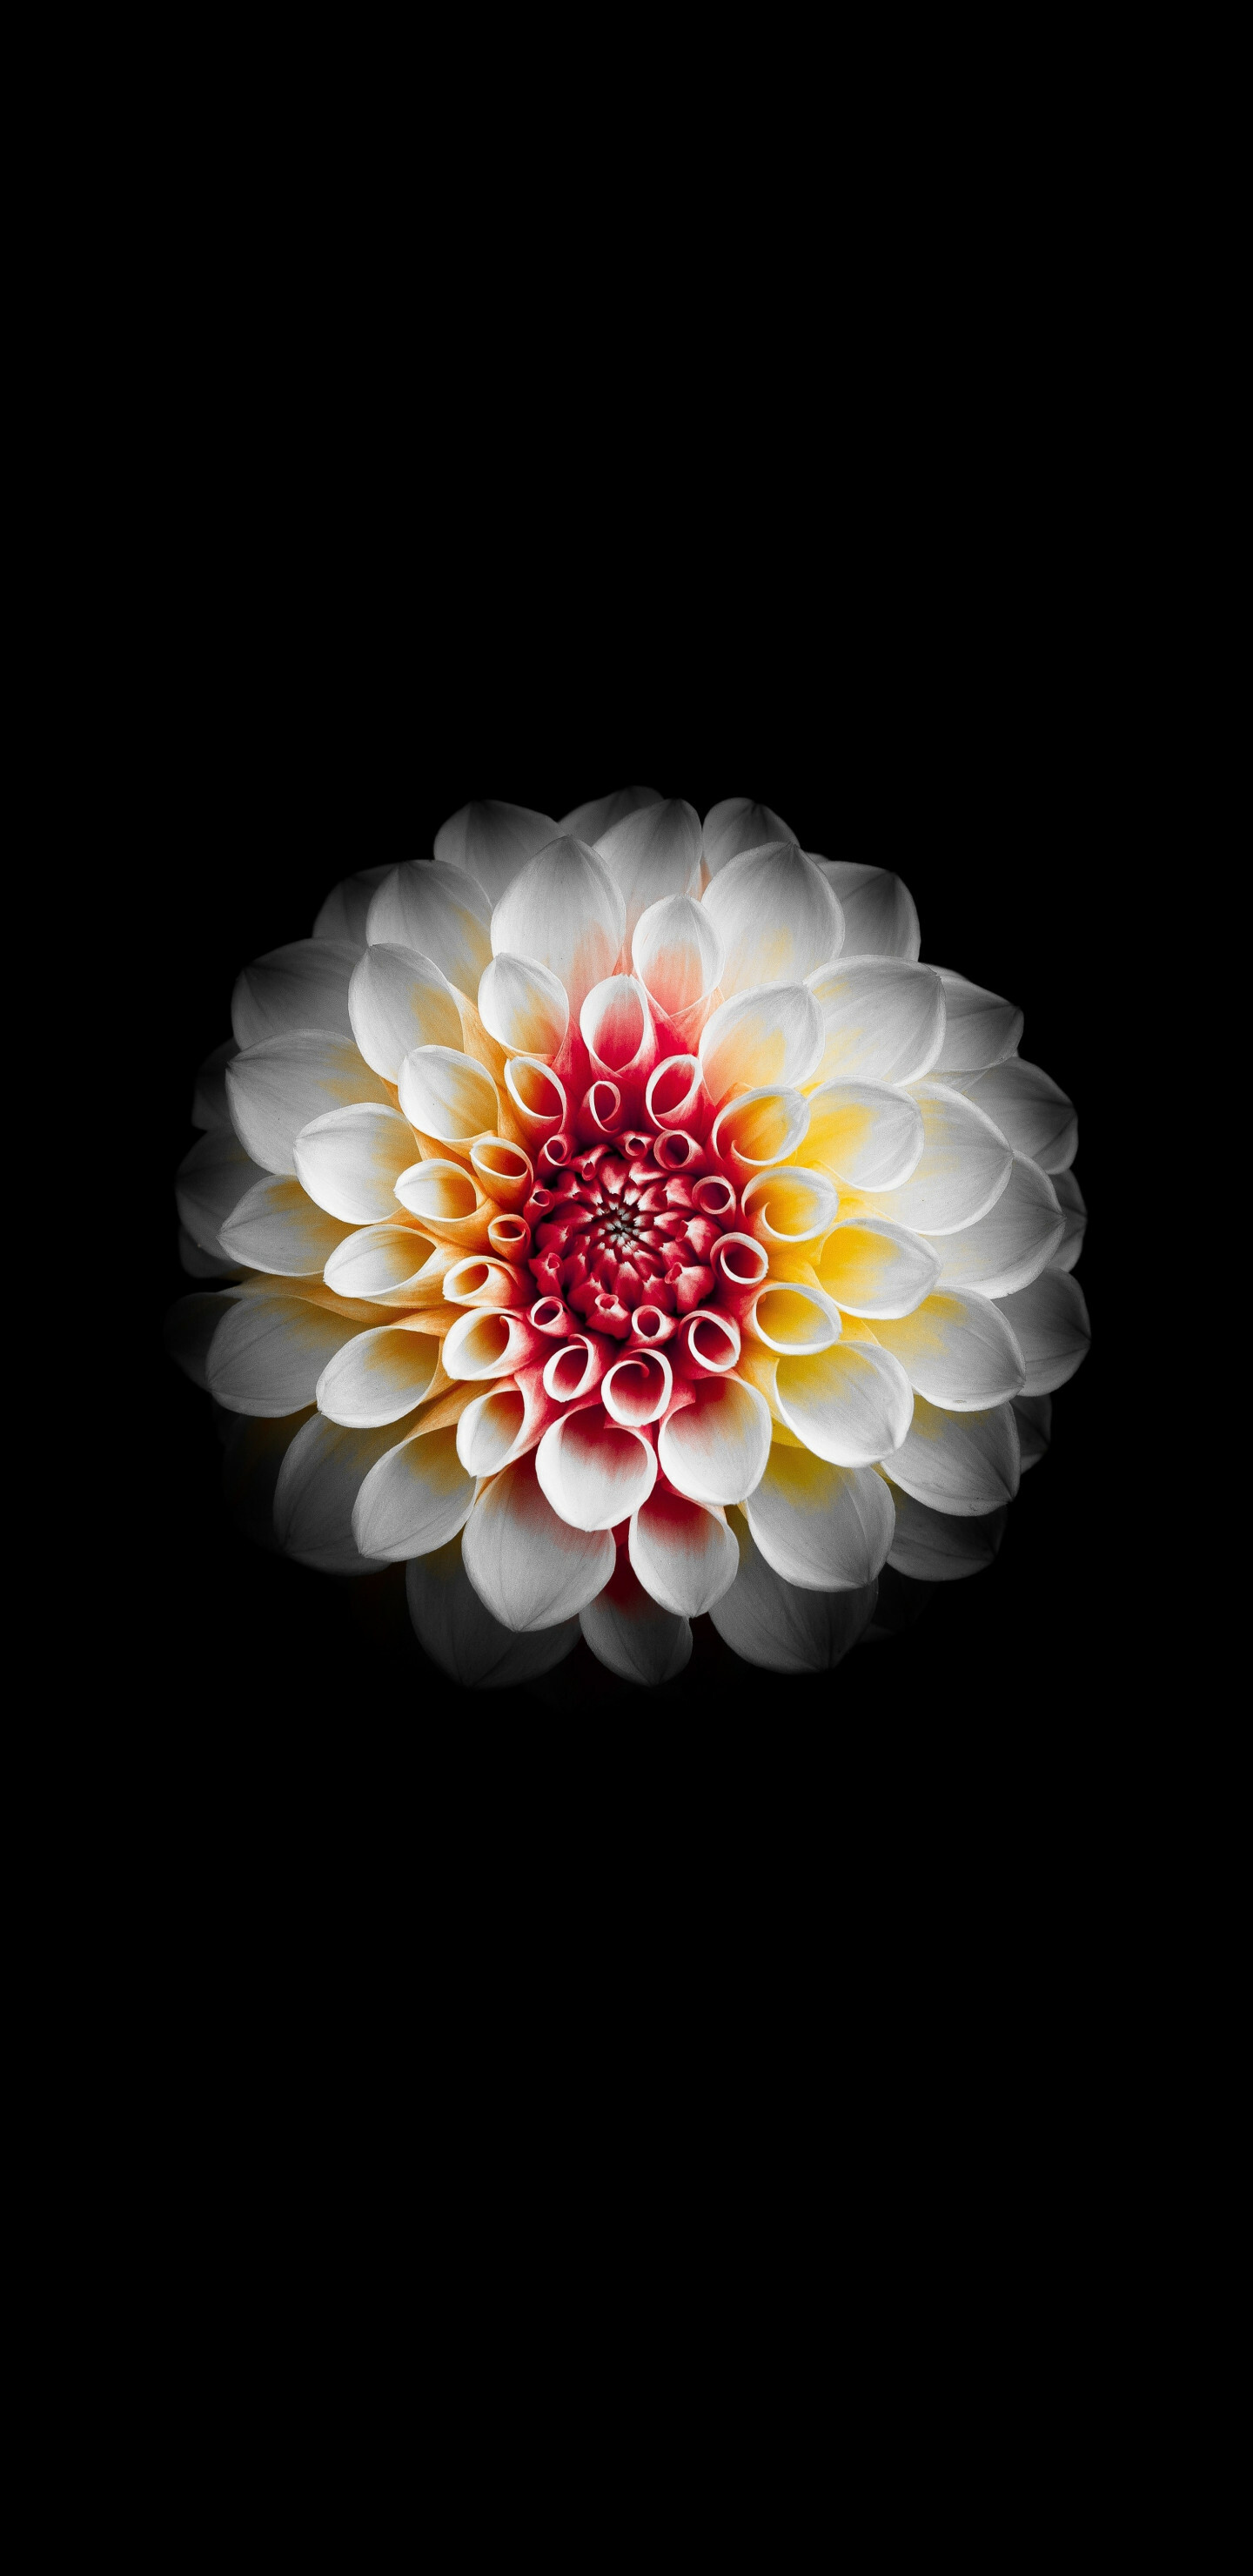 Chrysanthemum: Starts blooming in early autumn, This is also known as the favorite flower for the month of November. 1440x2960 HD Wallpaper.